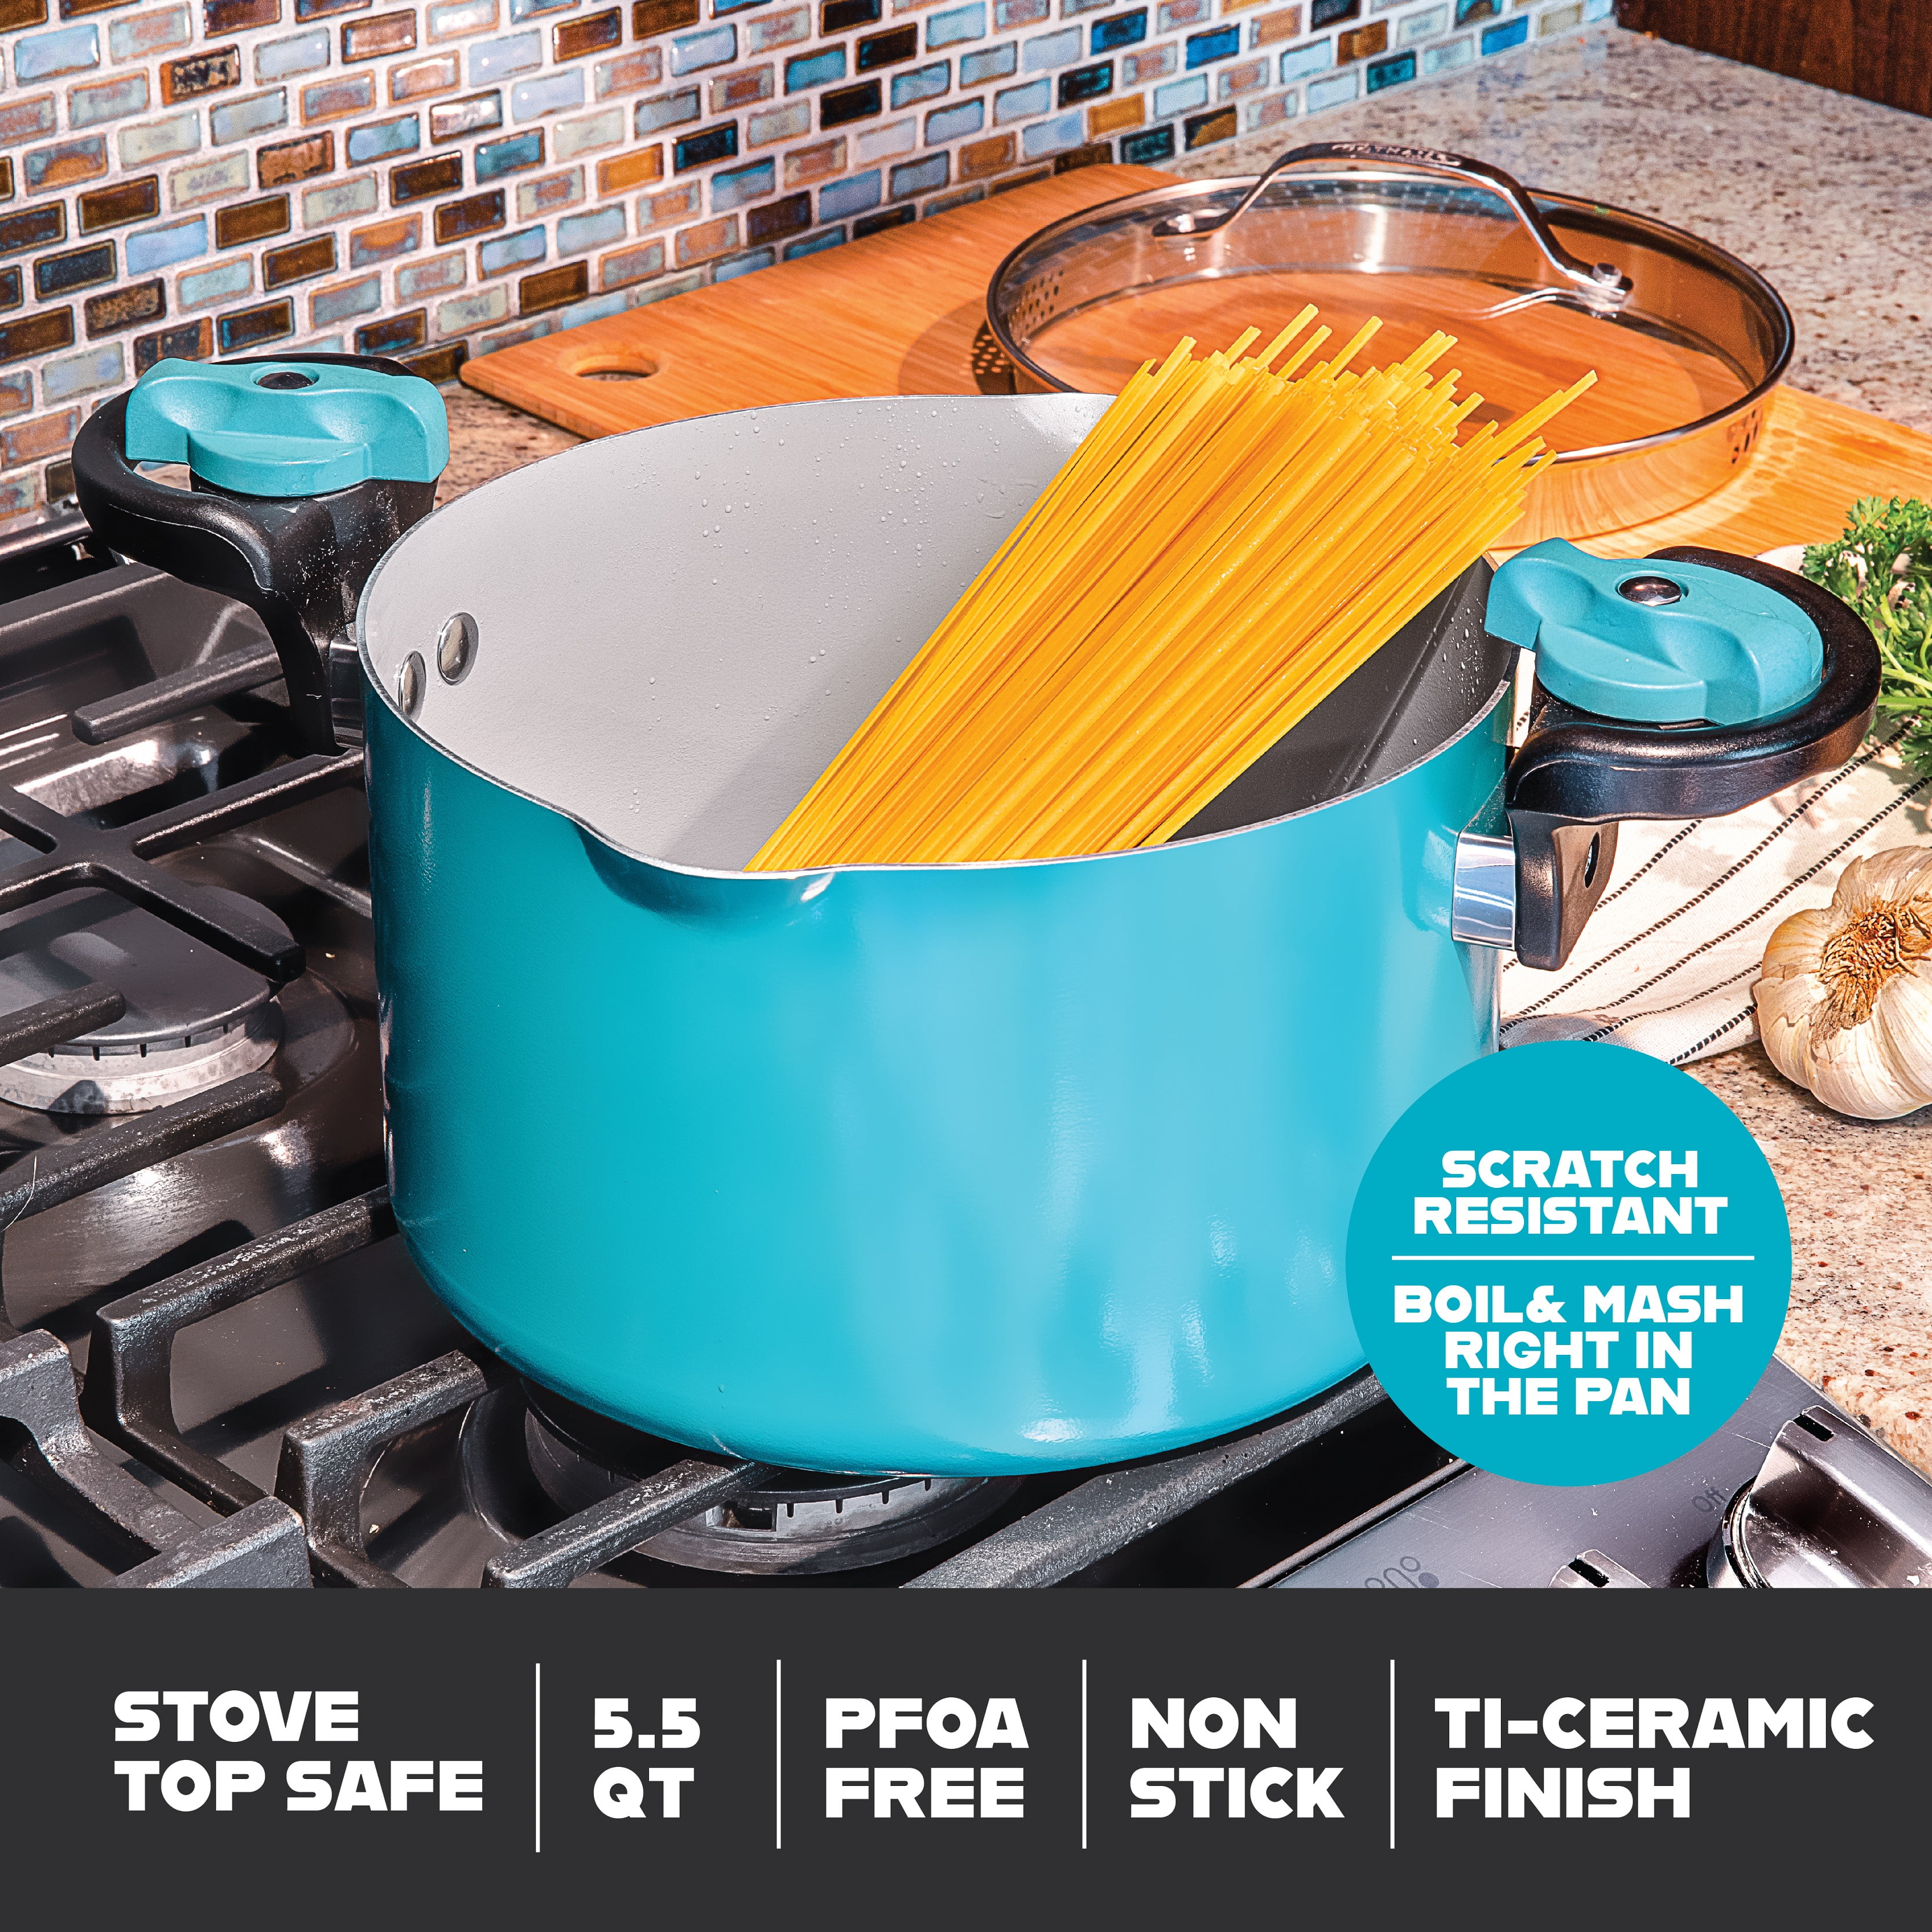 Gotham Steel 5 Quart Stock Multipurpose Pasta Pot with Strainer Lid & Twist  and Lock Handles, Nonstick Ceramic Surface Makes for Effortless Cleanup